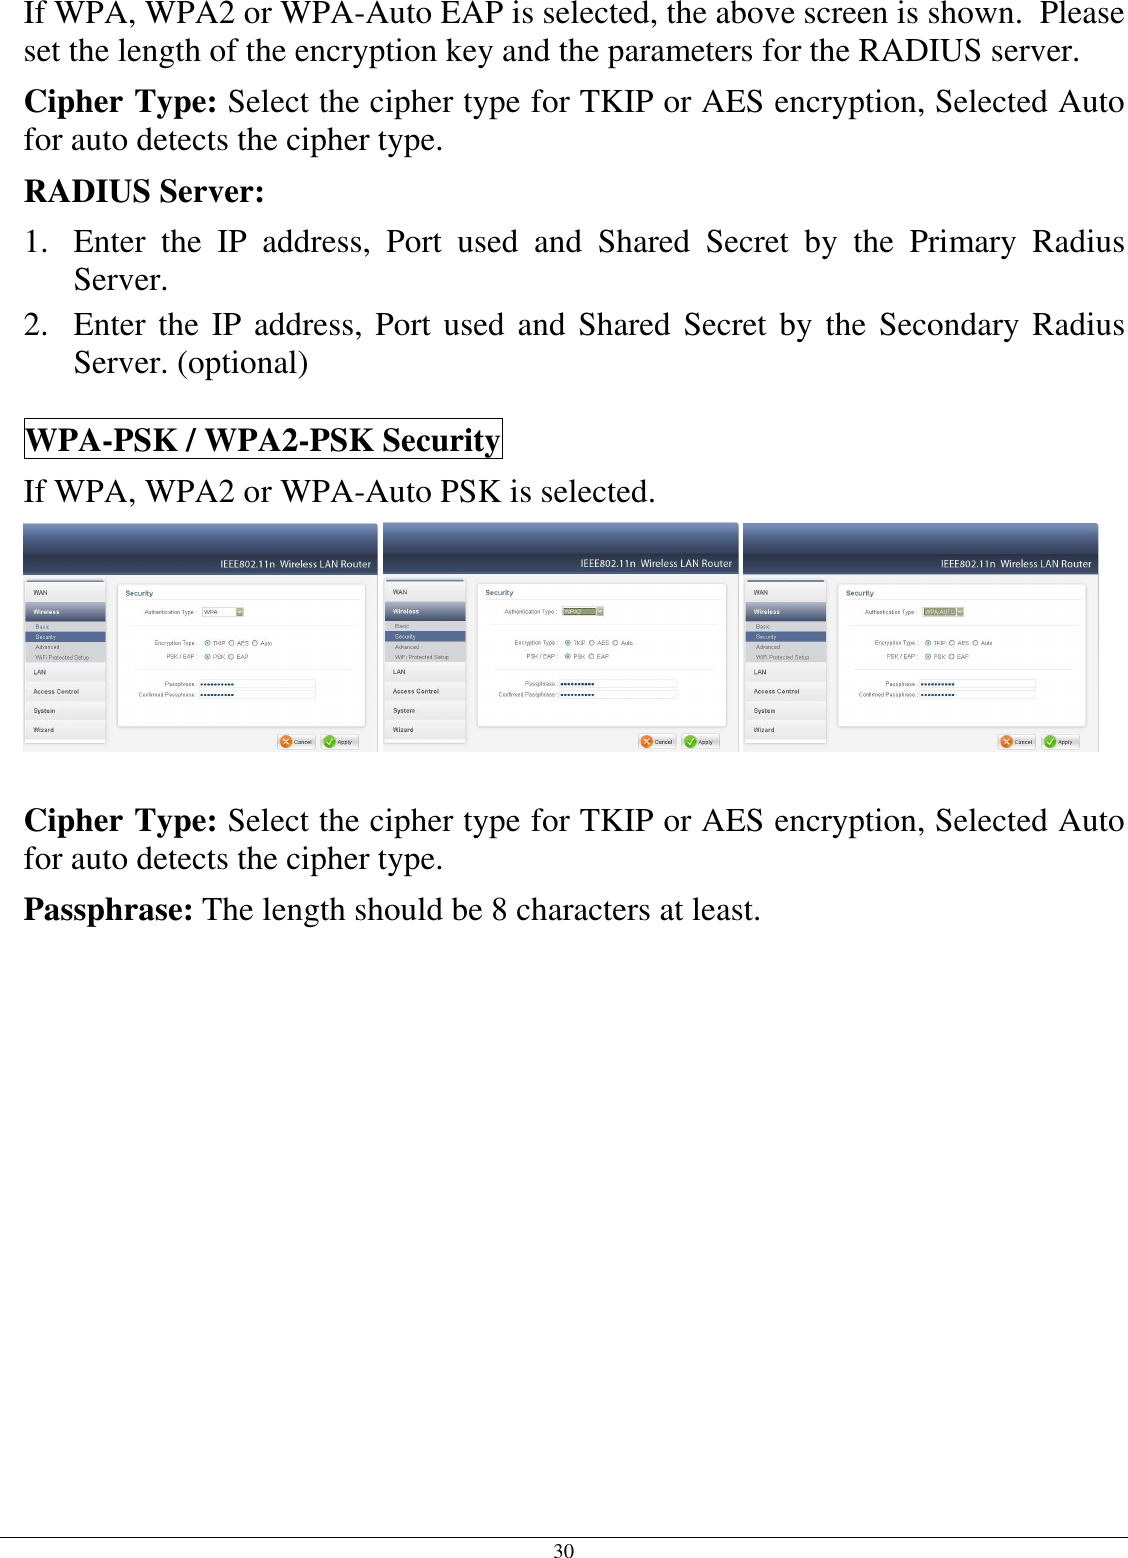 30 If WPA, WPA2 or WPA-Auto EAP is selected, the above screen is shown.  Please set the length of the encryption key and the parameters for the RADIUS server. Cipher Type: Select the cipher type for TKIP or AES encryption, Selected Auto for auto detects the cipher type.  RADIUS Server: 1. Enter  the  IP  address,  Port  used  and  Shared  Secret  by  the  Primary  Radius Server. 2. Enter the IP address, Port used and Shared Secret by the Secondary Radius Server. (optional) WPA-PSK / WPA2-PSK Security If WPA, WPA2 or WPA-Auto PSK is selected.     Cipher Type: Select the cipher type for TKIP or AES encryption, Selected Auto for auto detects the cipher type.  Passphrase: The length should be 8 characters at least.   